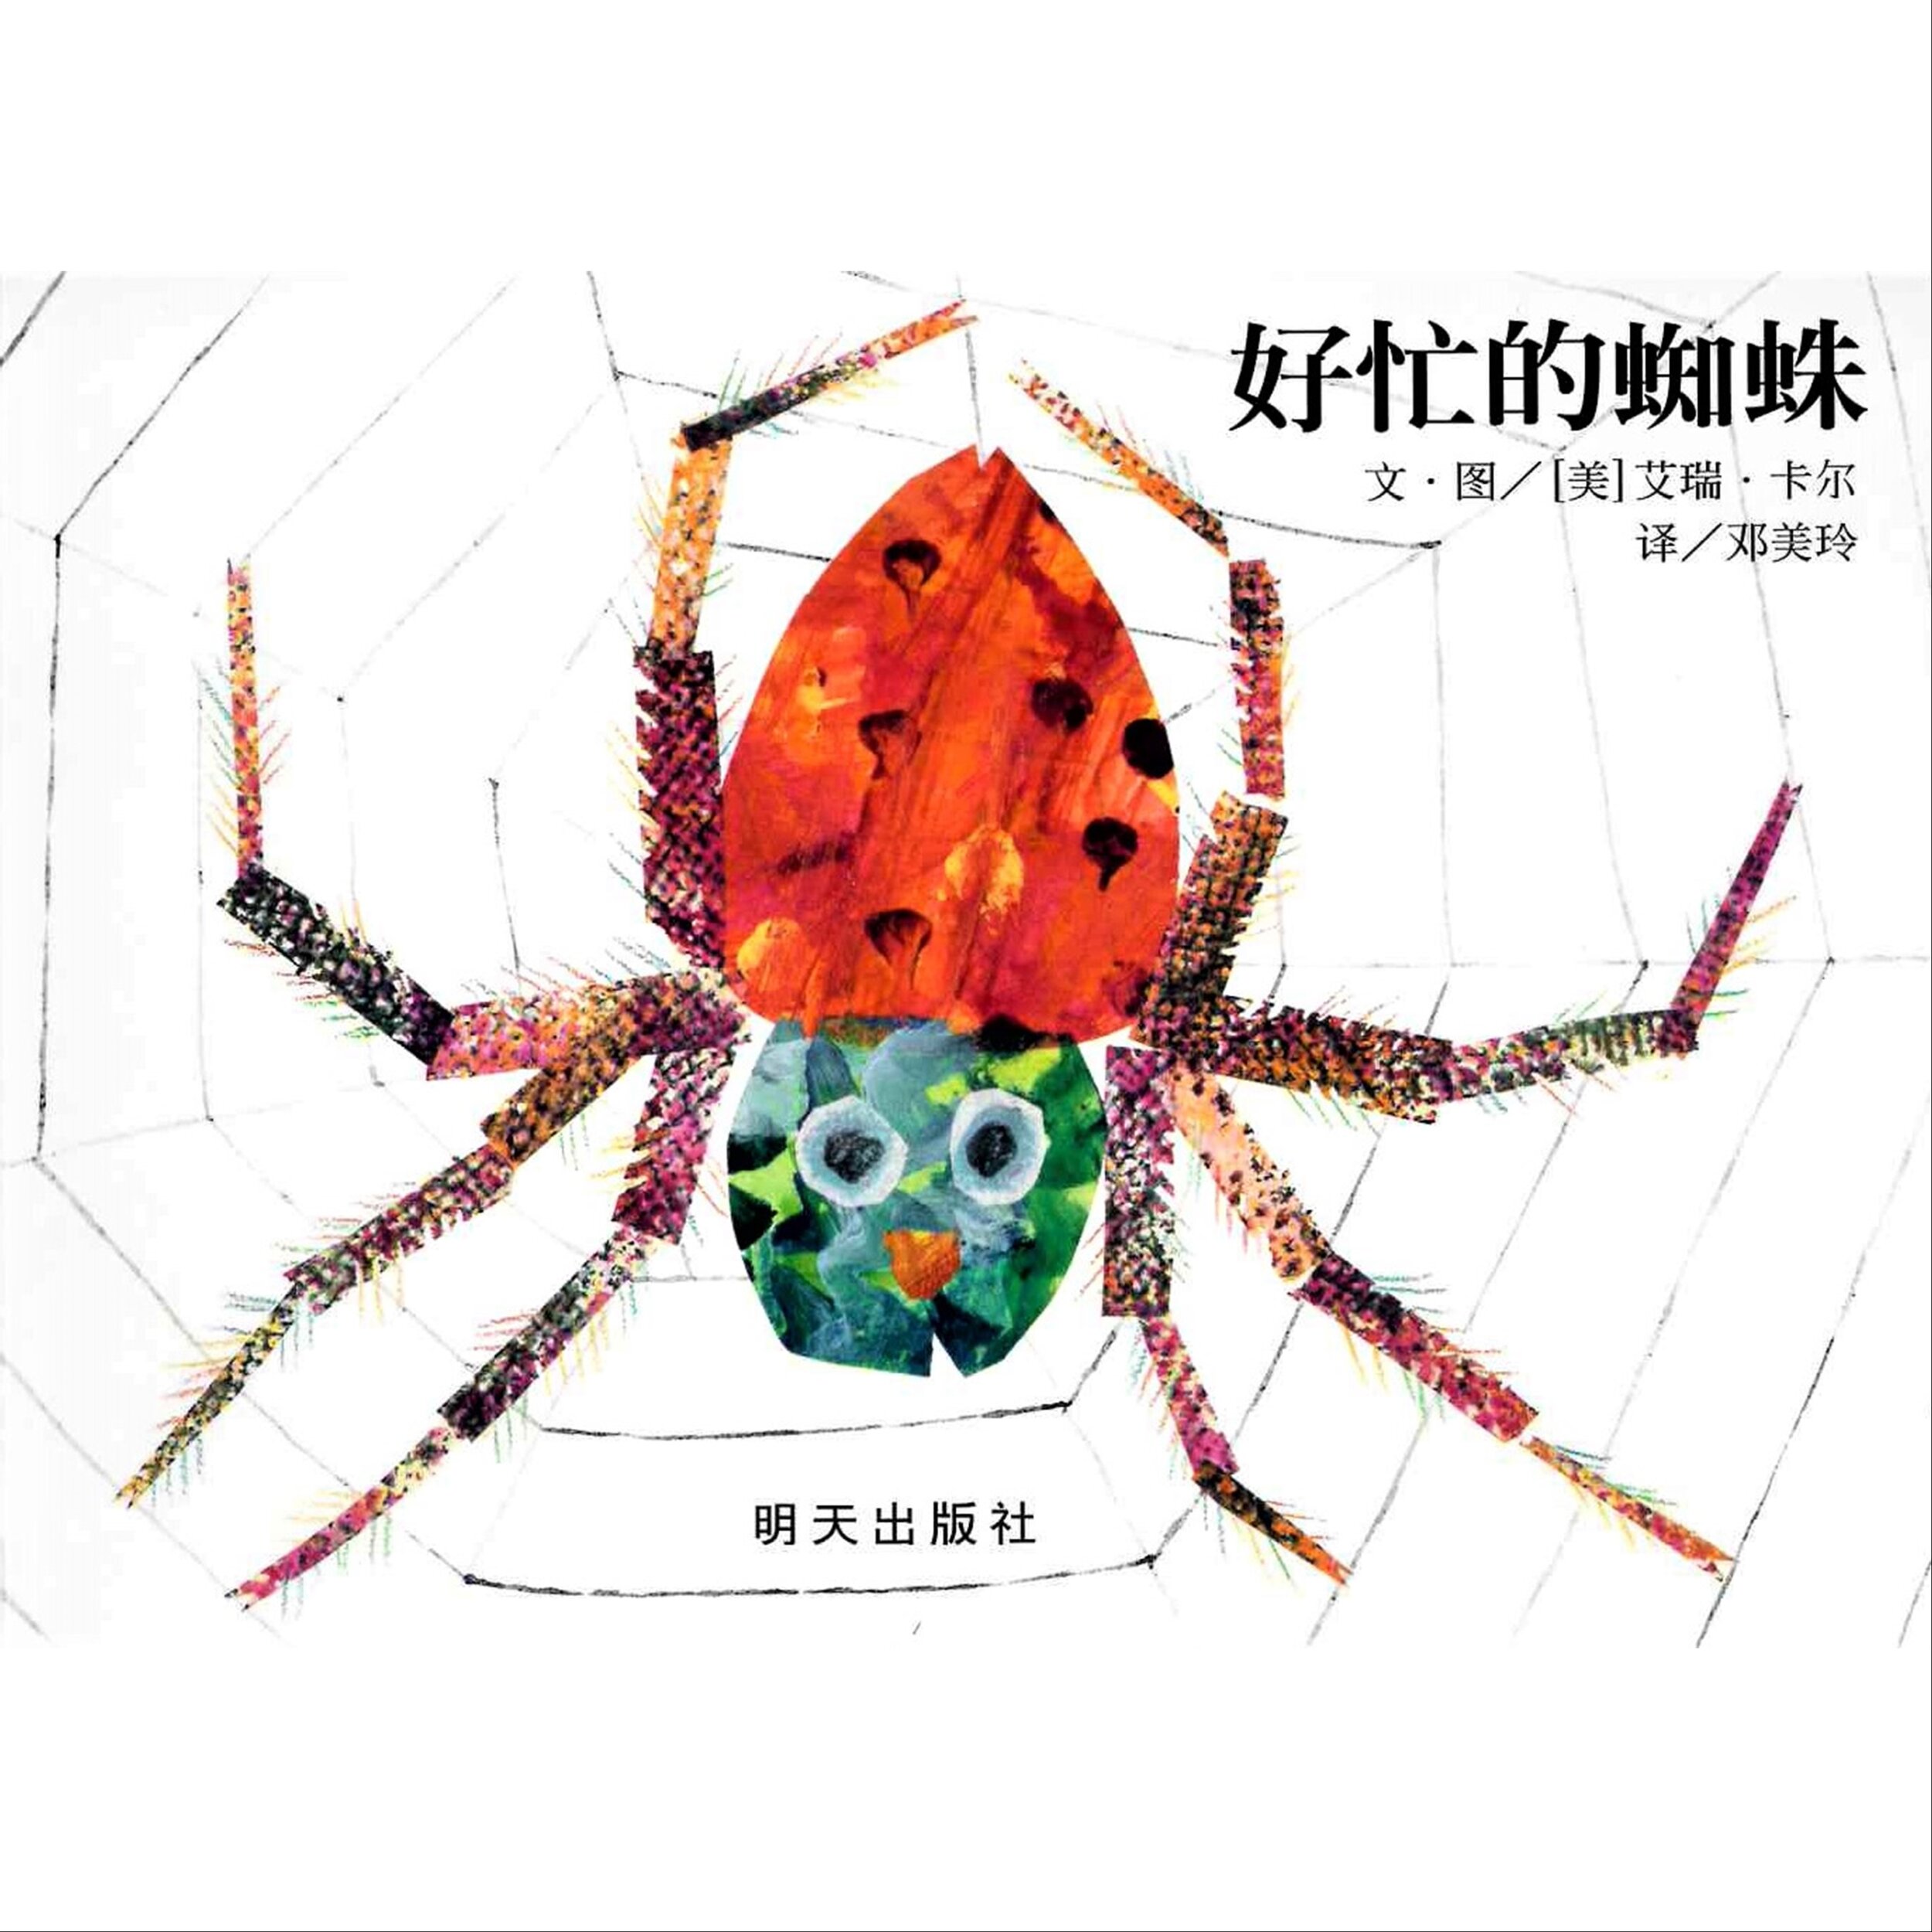 The Very Busy Spider Simplified Chinese Translation